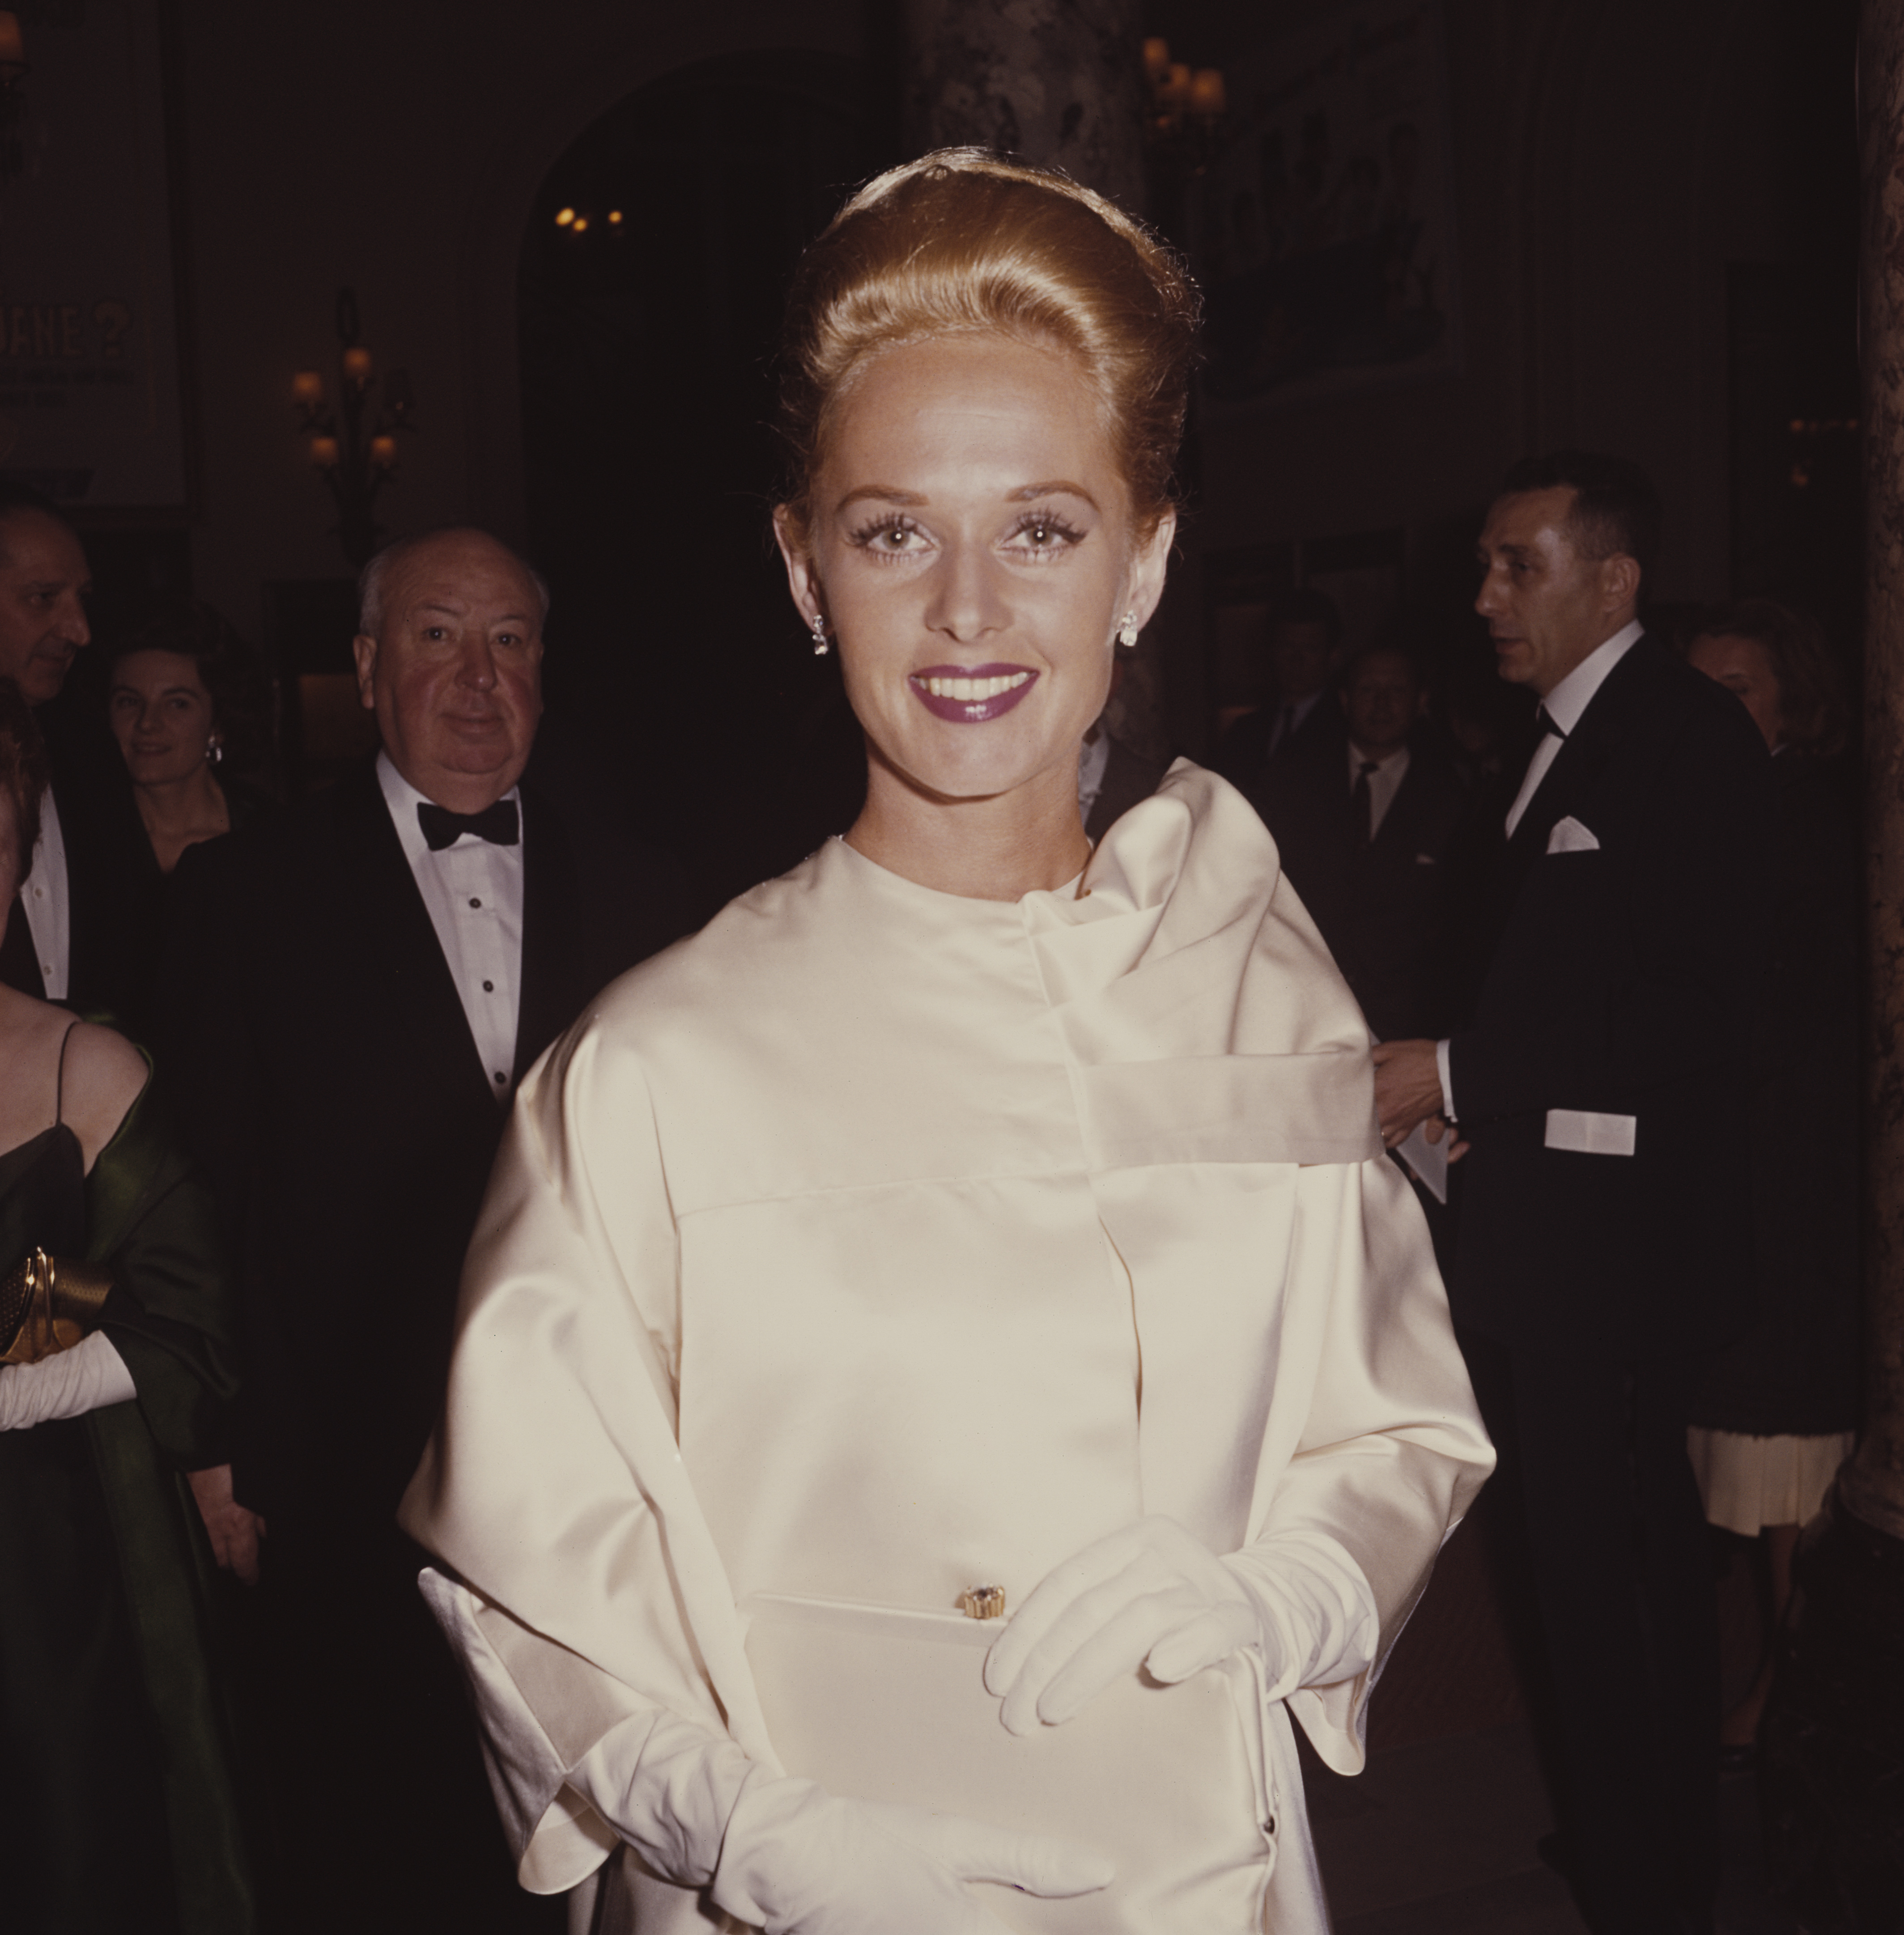 Tippi Hedren posed wearing a white silk style dress with matching white gloves at the Cannes film festival in France in May 1963. Behind her is the film director Alfred Hitchcock who directed Hedren in the film 'The Birds' | Source: Getty Images